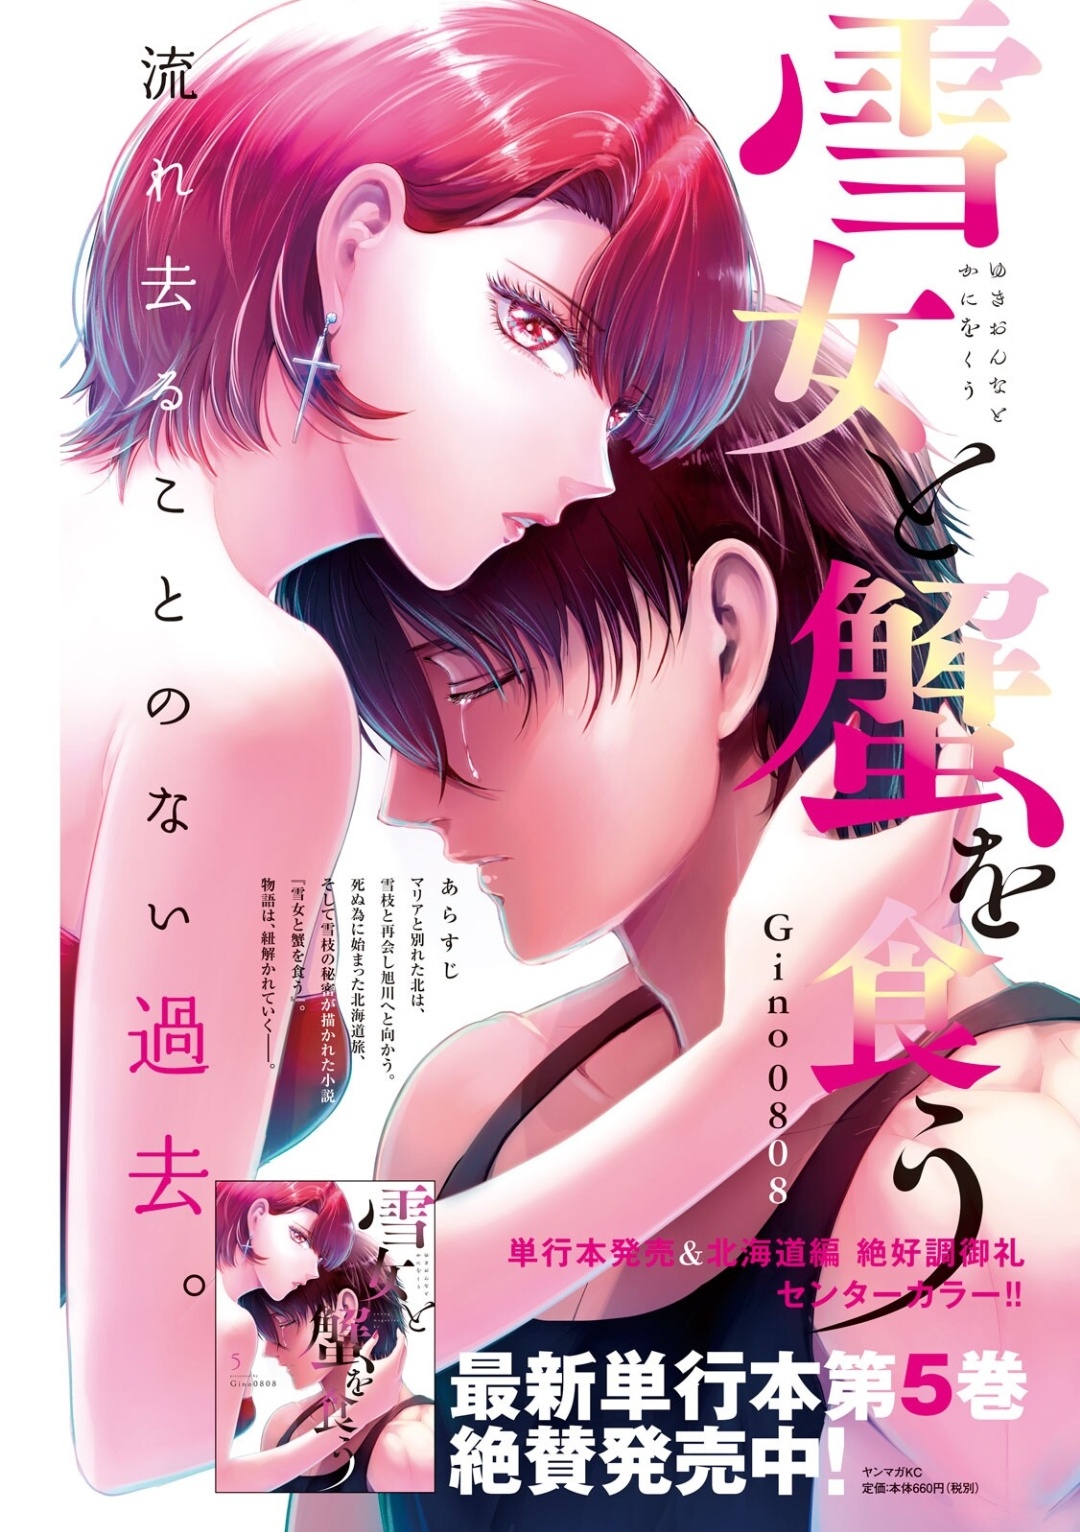 Young Magazine News A Twitter The Other Color Page Is For Gino0808 S Human Drama Yuki Onna To Kani Wo Kuu The Illustration Promotes The Series 5th Volume Which Was Released Earlier This Month